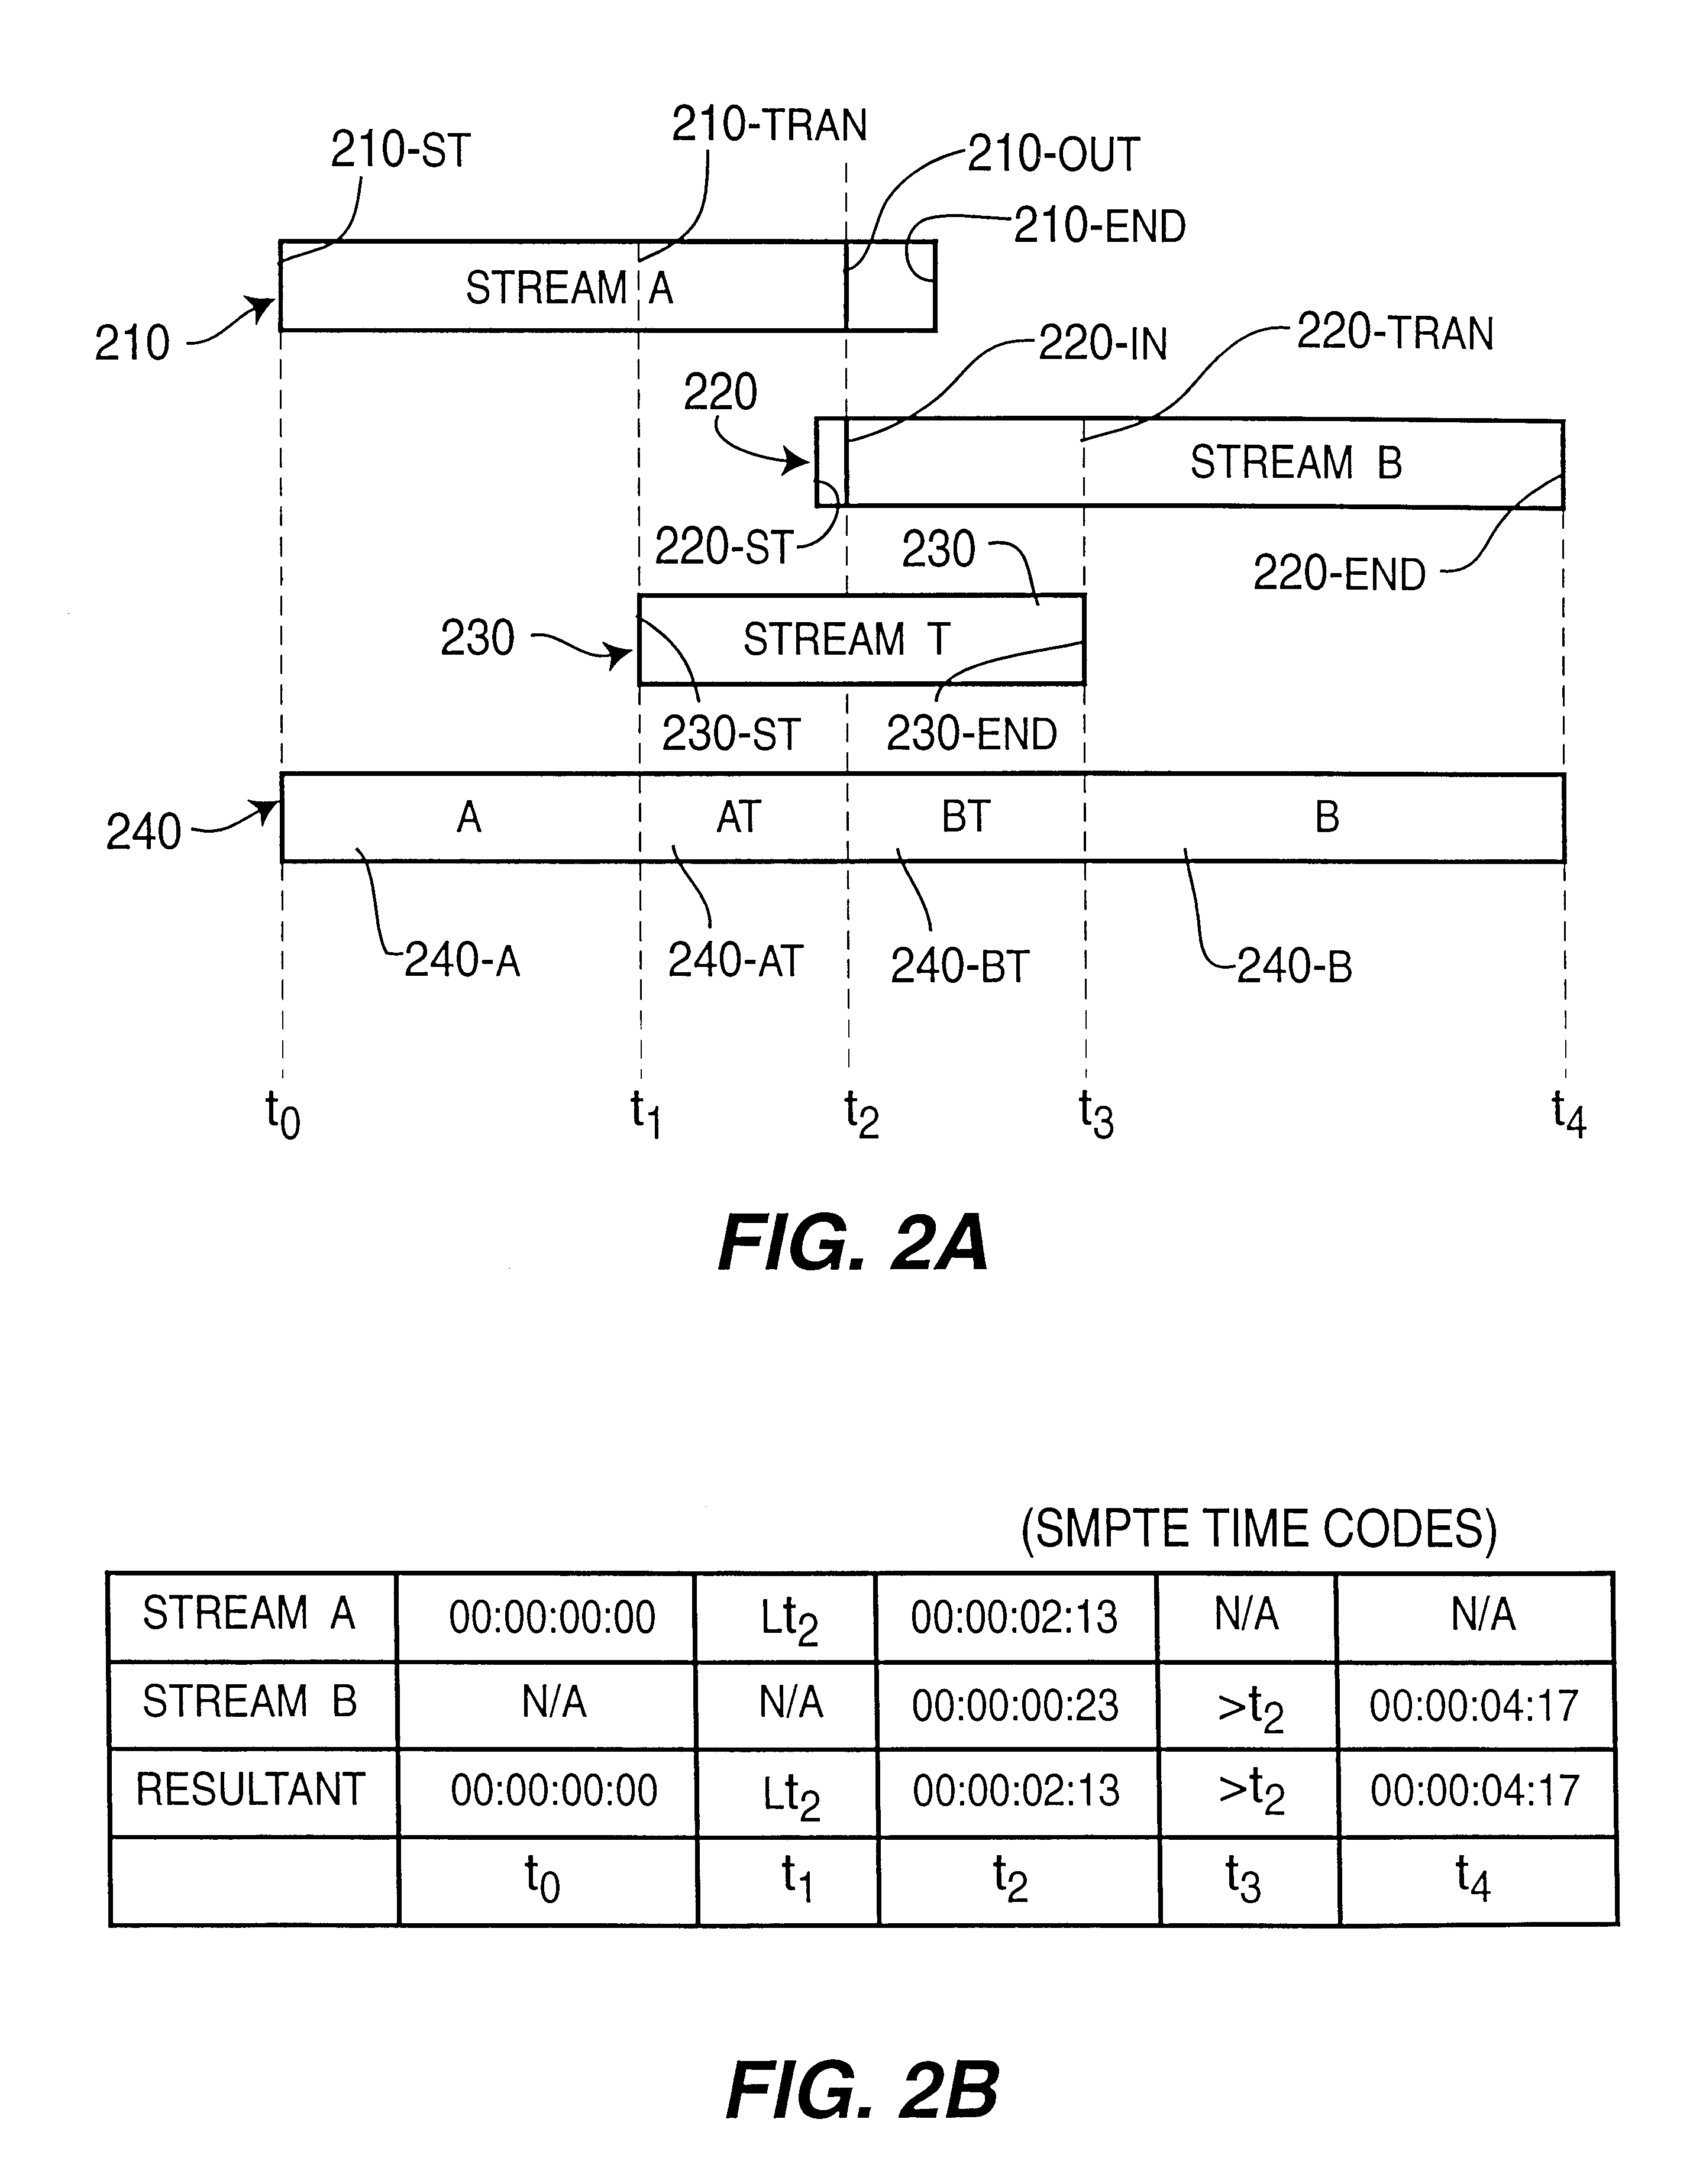 Frame-accurate seamless splicing of information streams